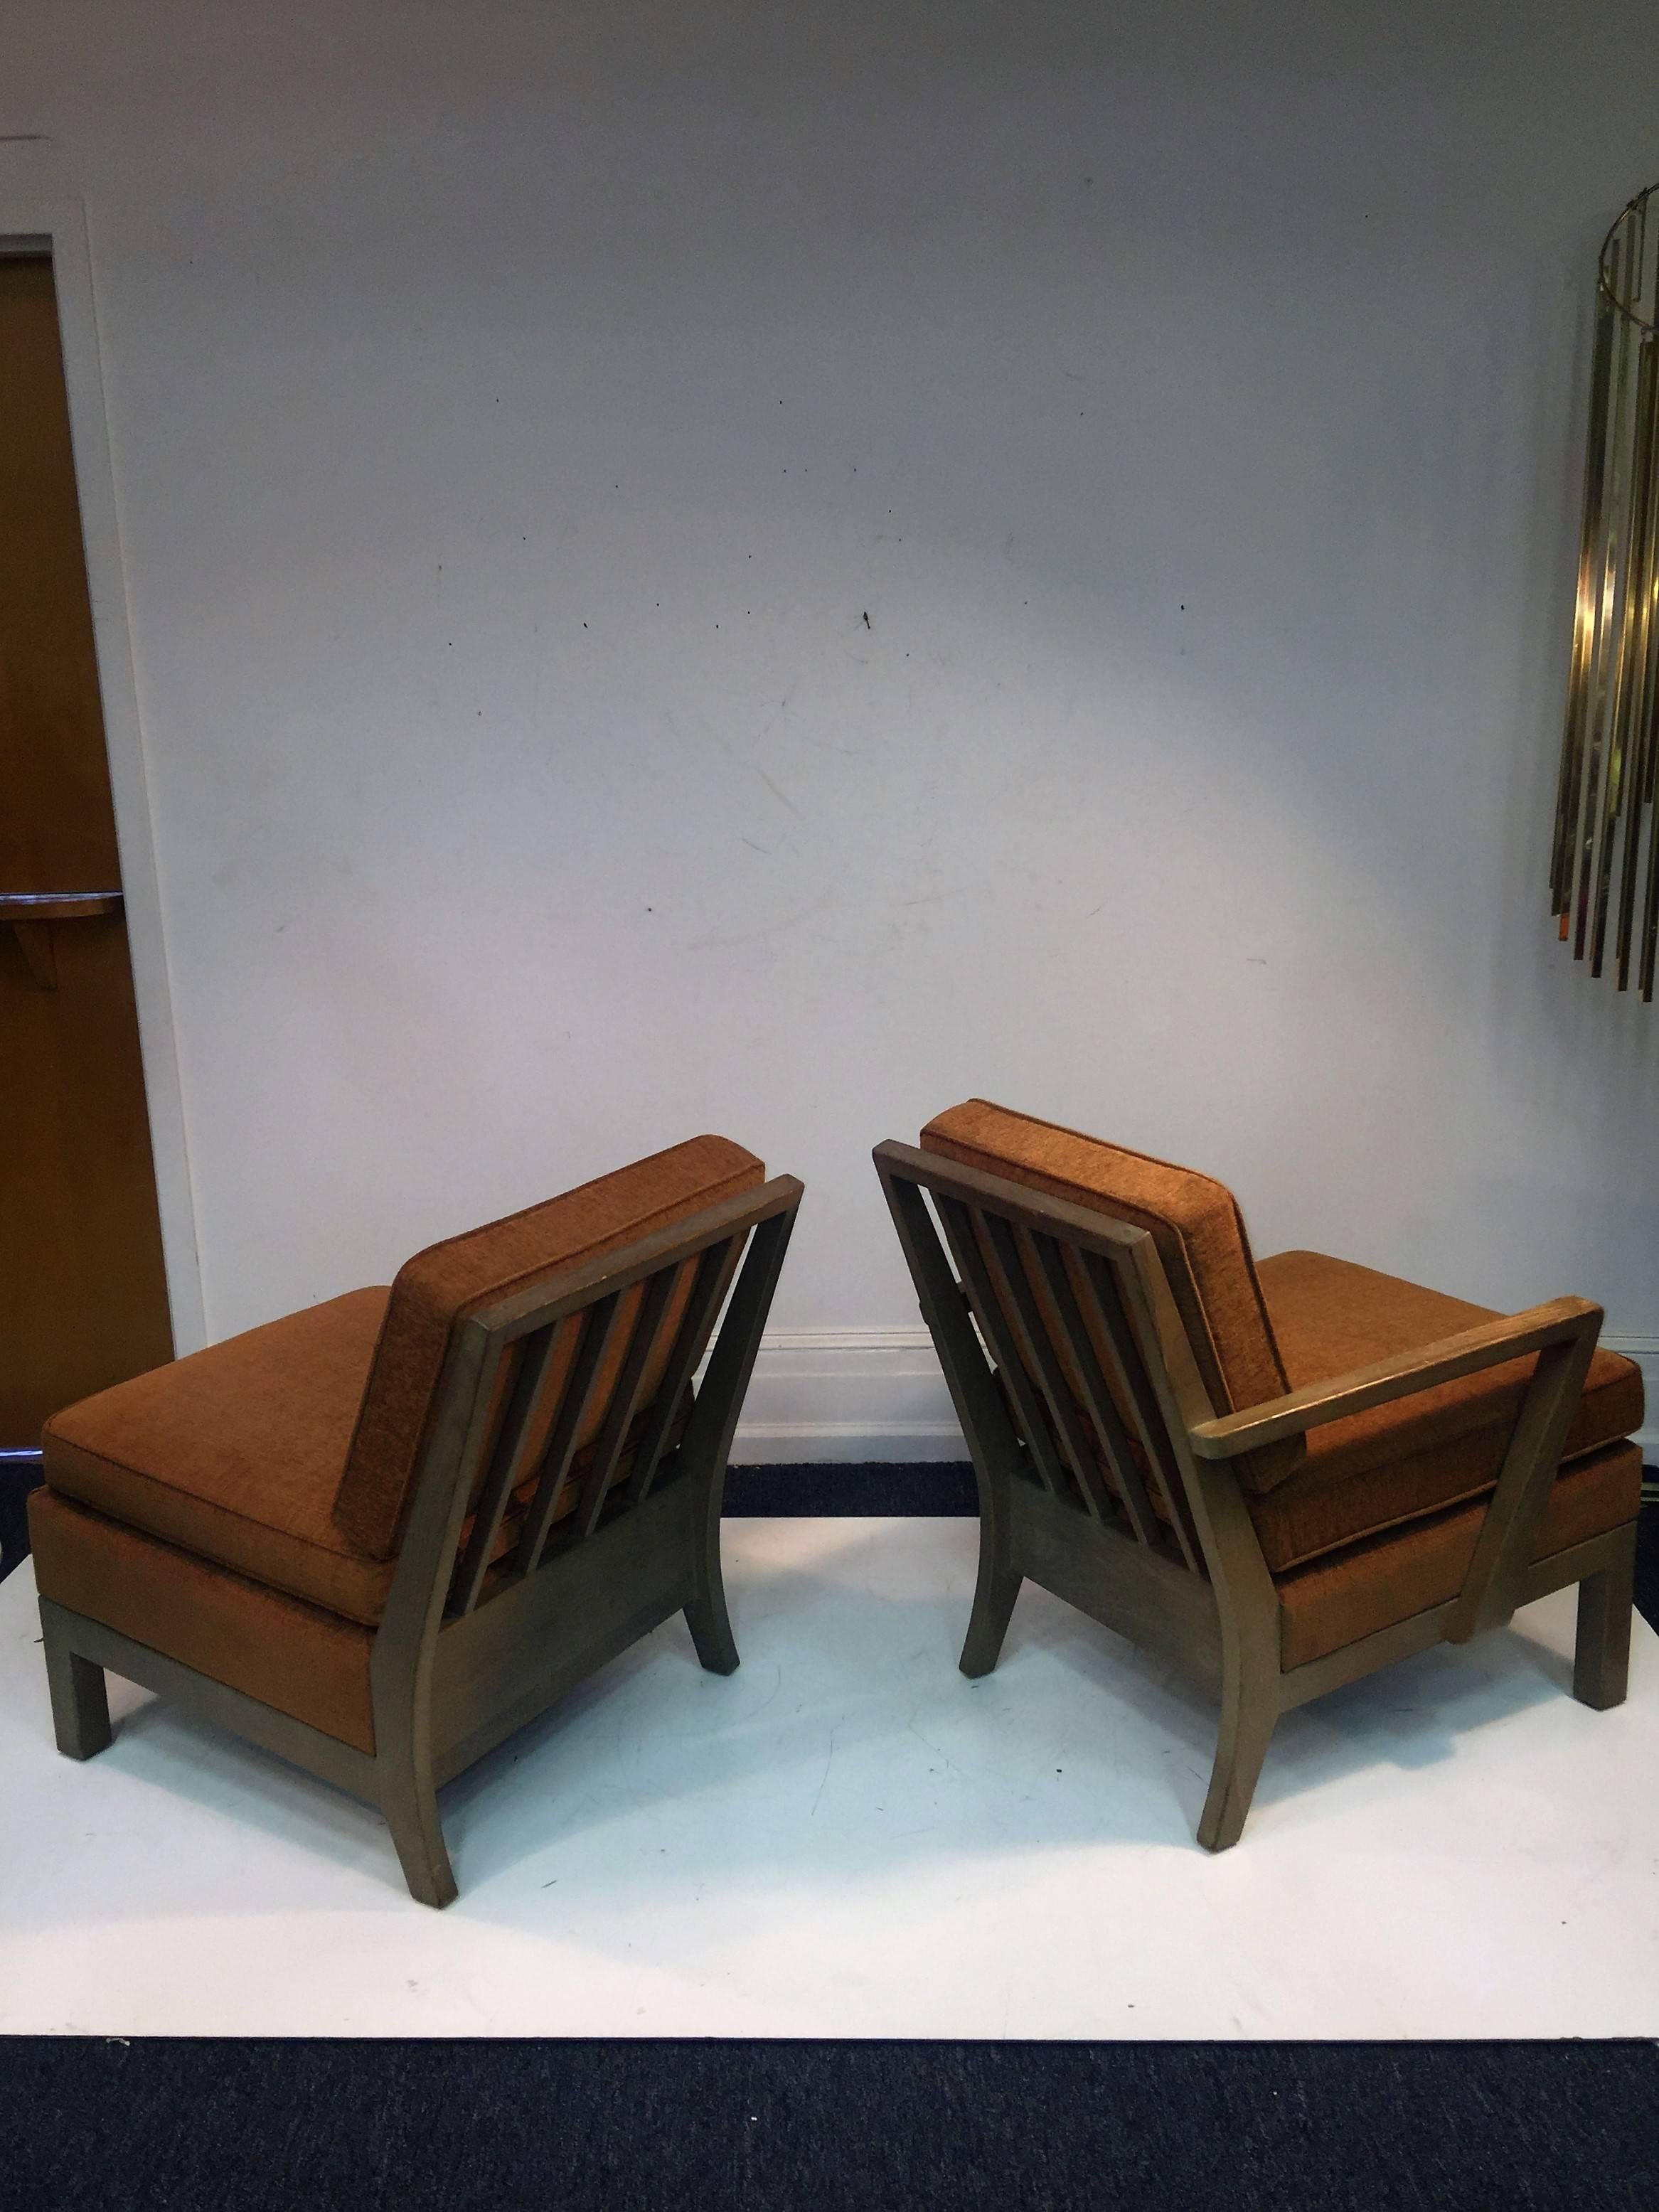 Phenomenal Modernist Pair of His/Hers Cerused Oak Armchairs In Excellent Condition For Sale In Mount Penn, PA